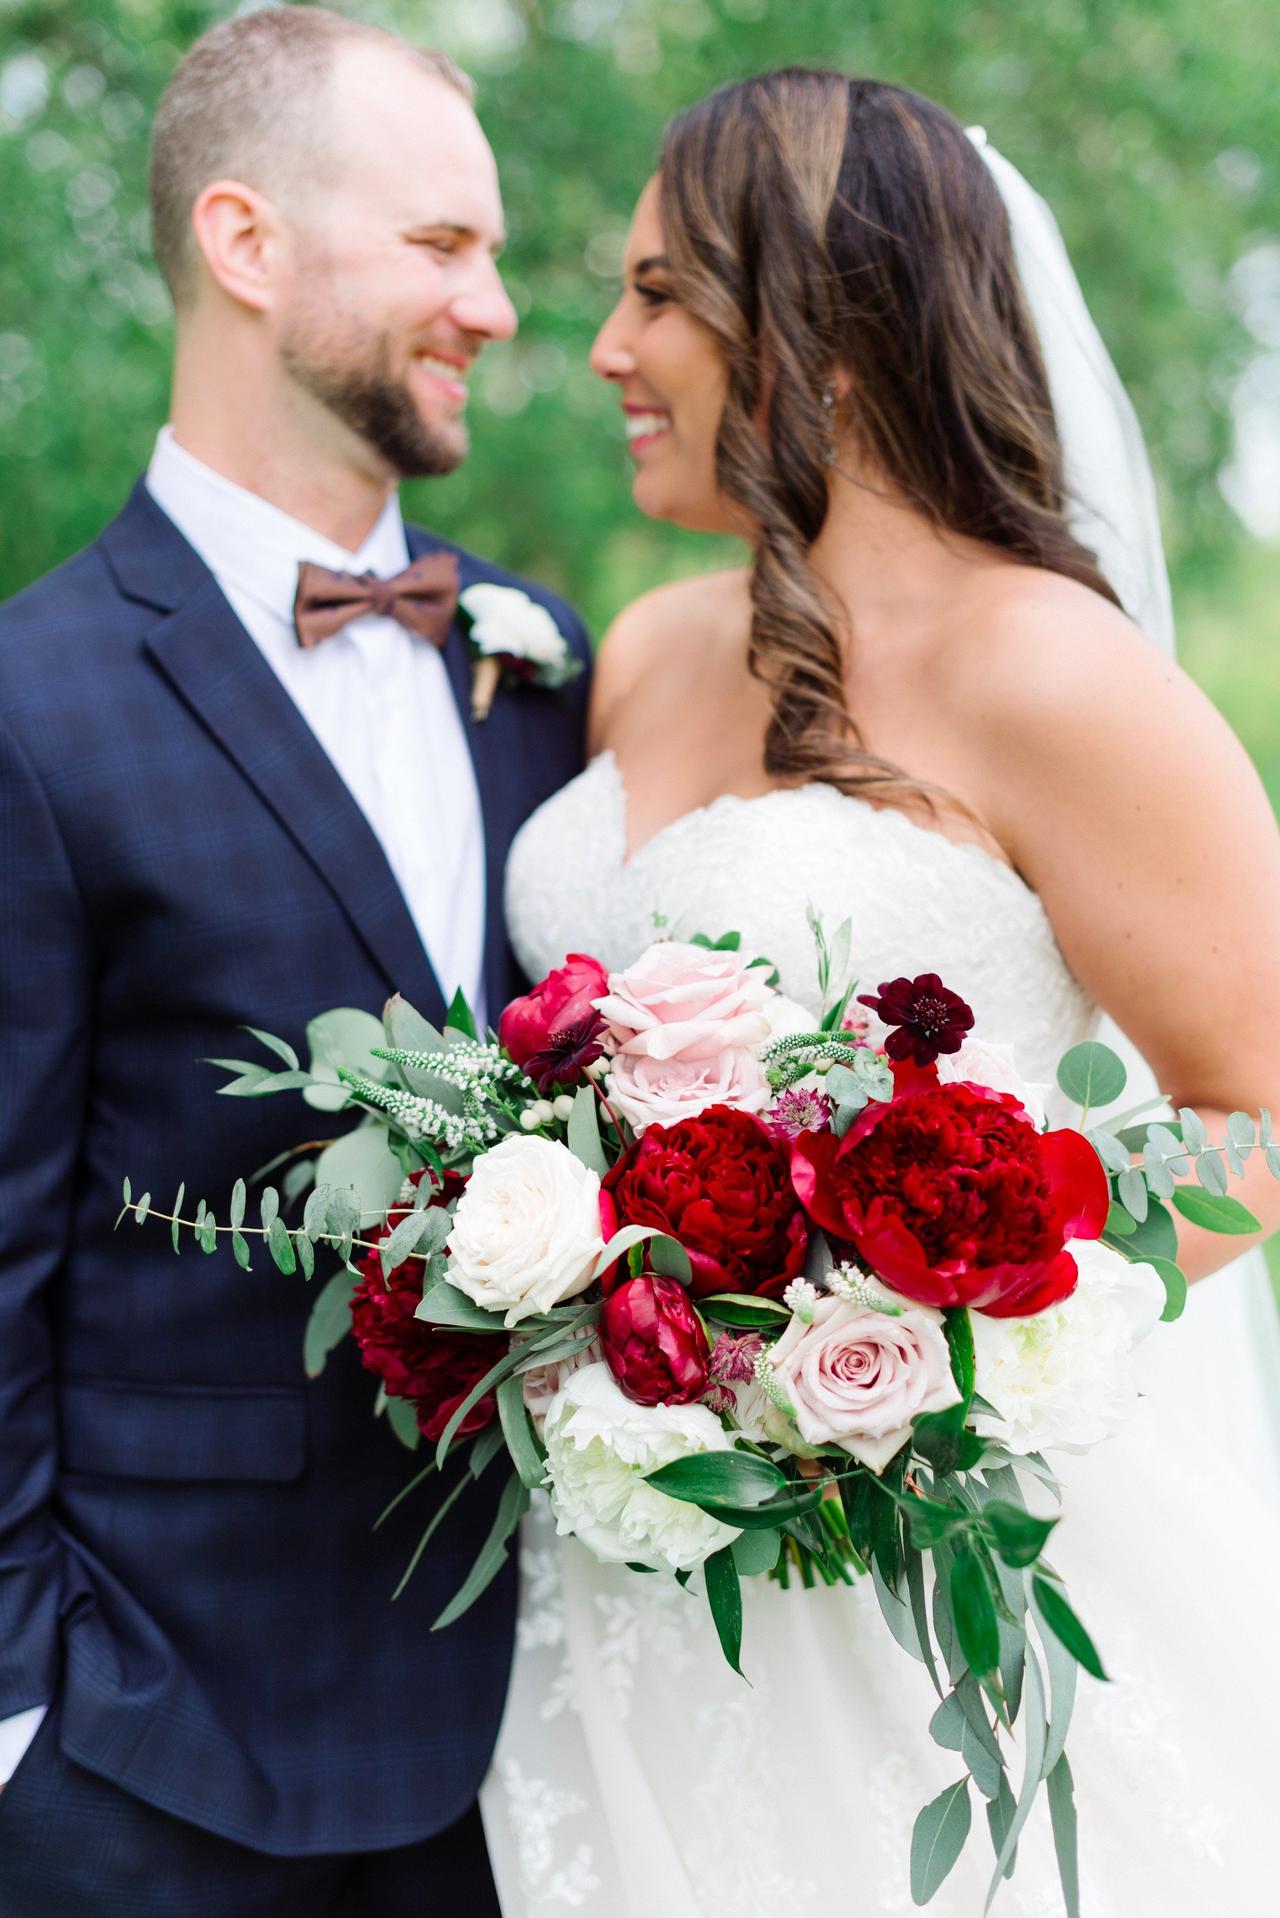 Flowers Meanings: Make Your Bridal Bouquet More Symbolic